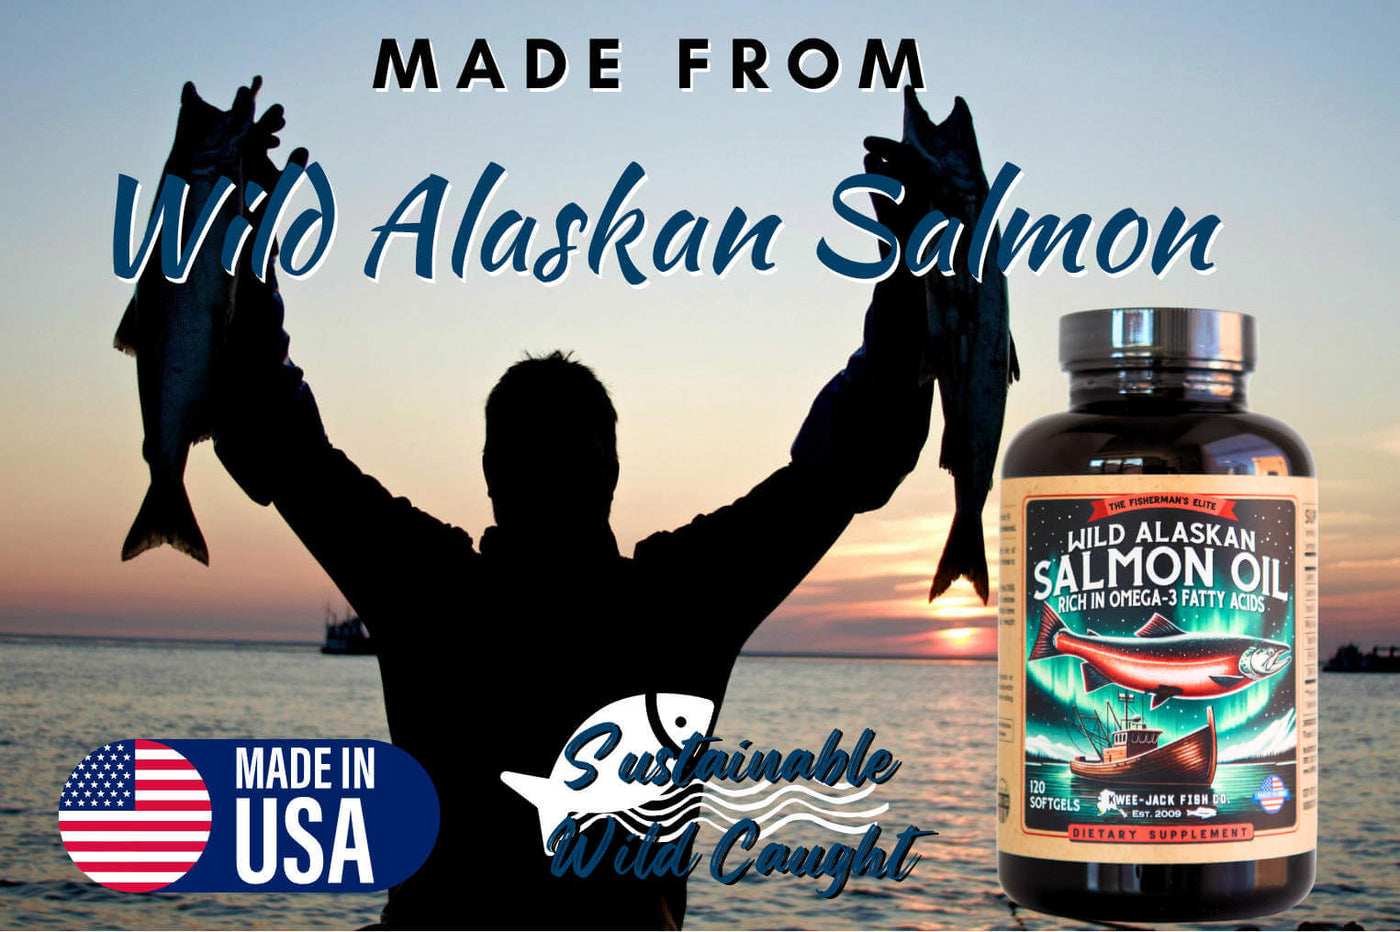 KweeJack Fish Co. wild Alaska salmon oil supplement with fish held in background.